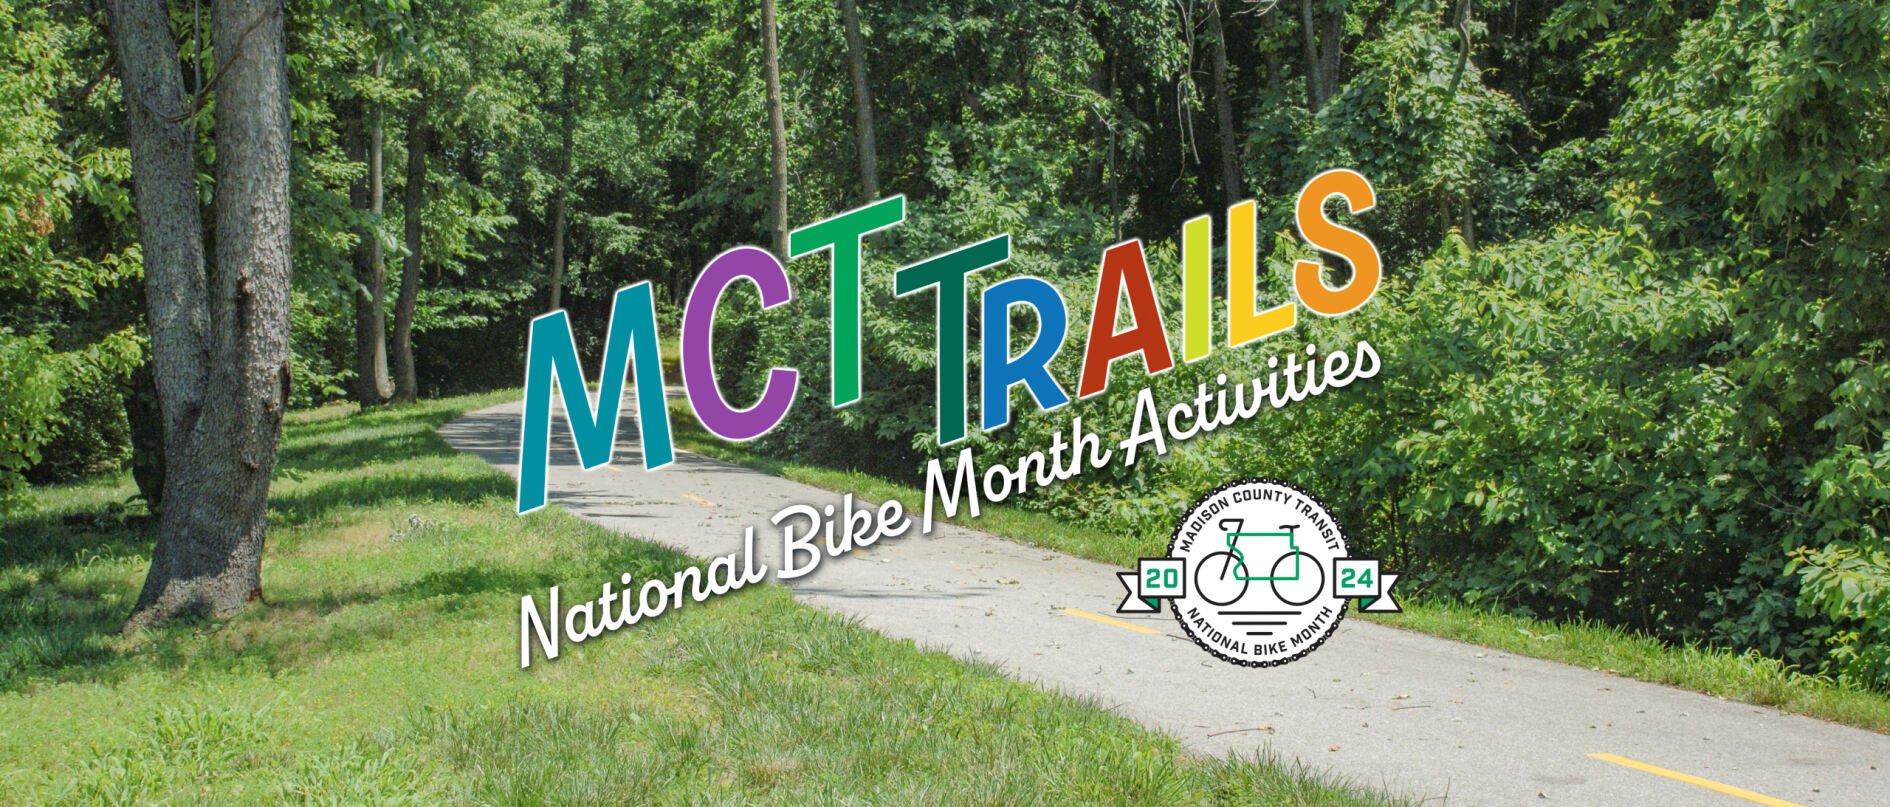 MCT Trail Safety and Courtesy